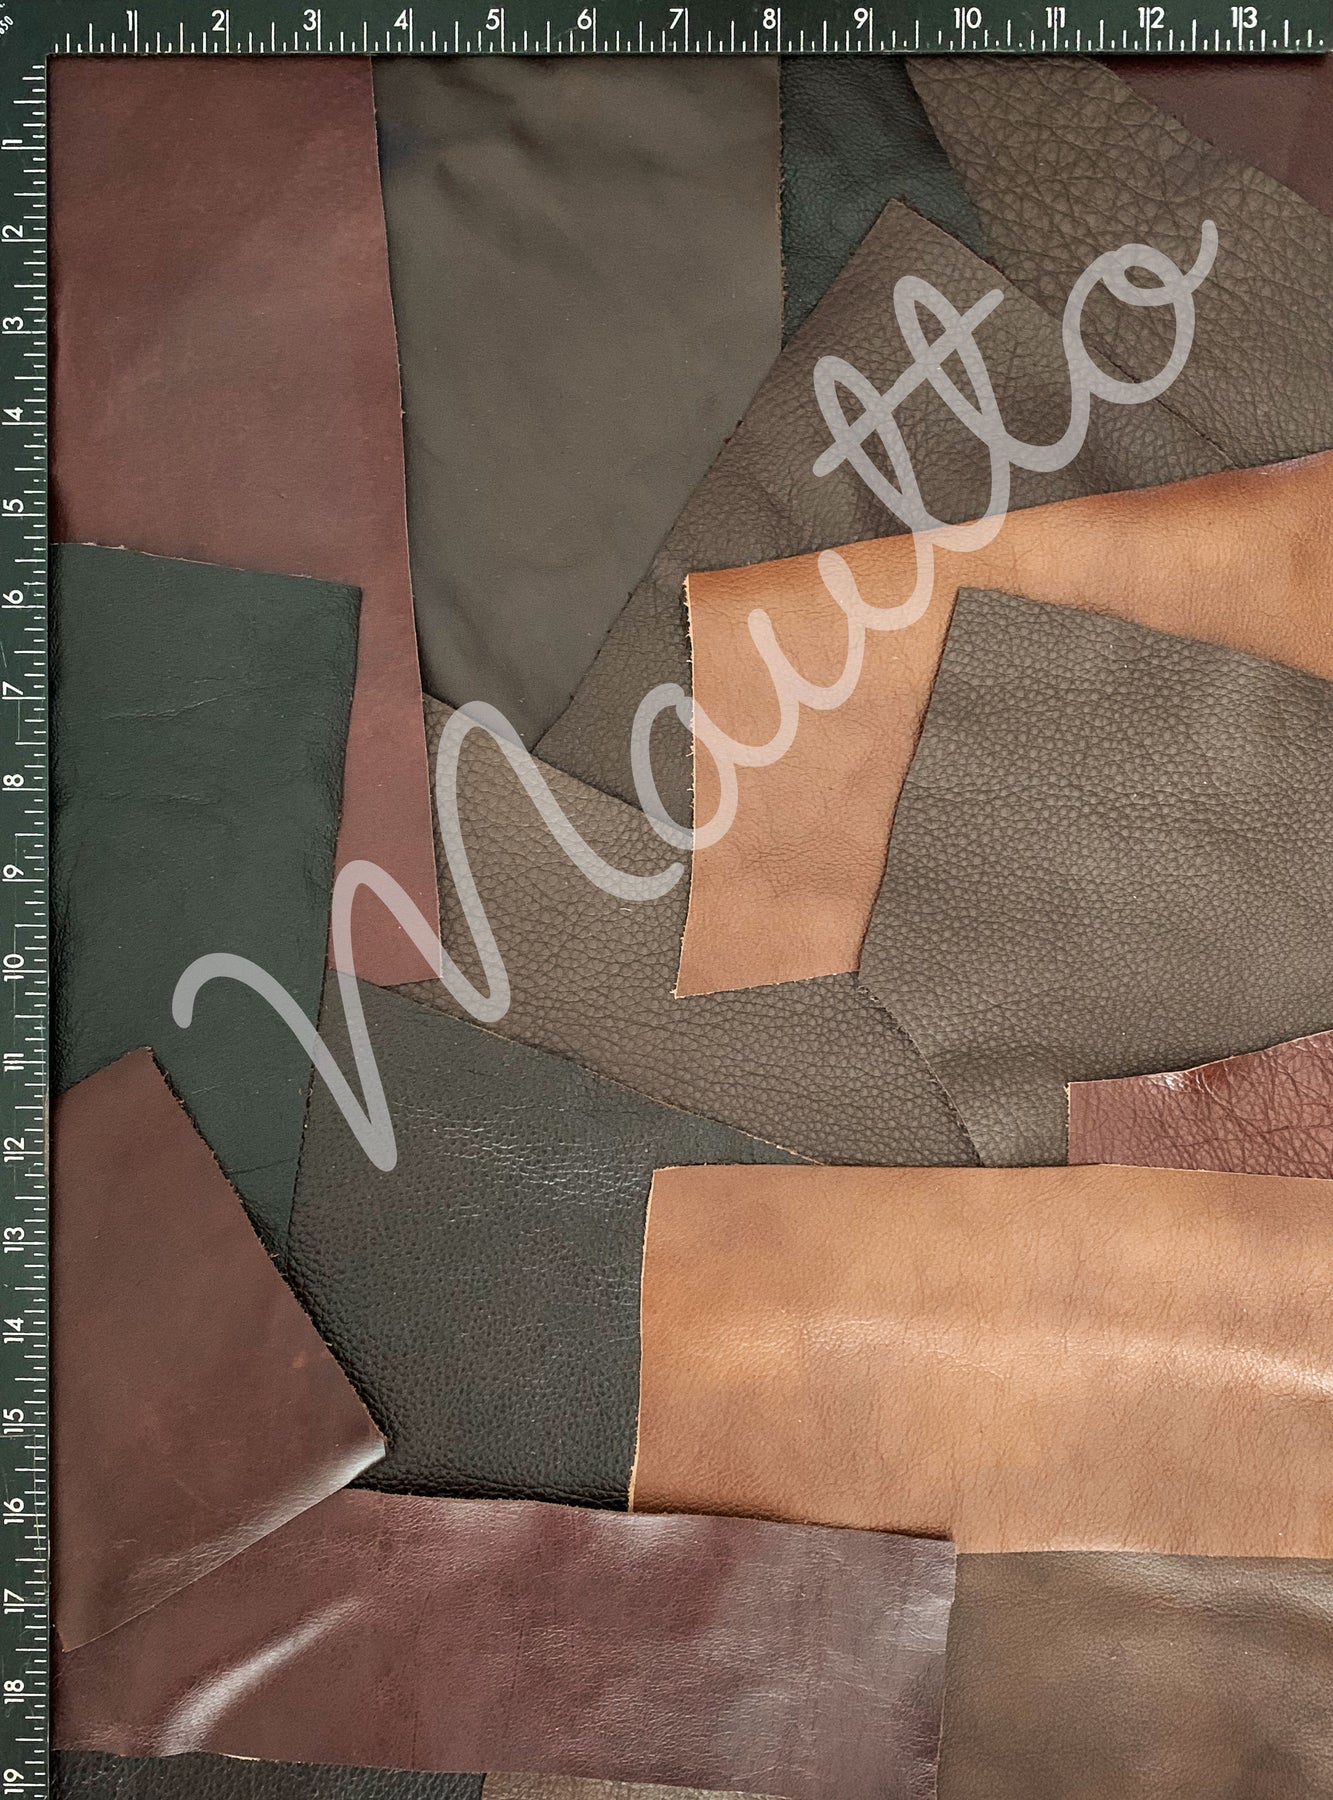 Tan Leather Pieces - 1 Pound Bag of Scraps & Remnants for Crafts – Mautto